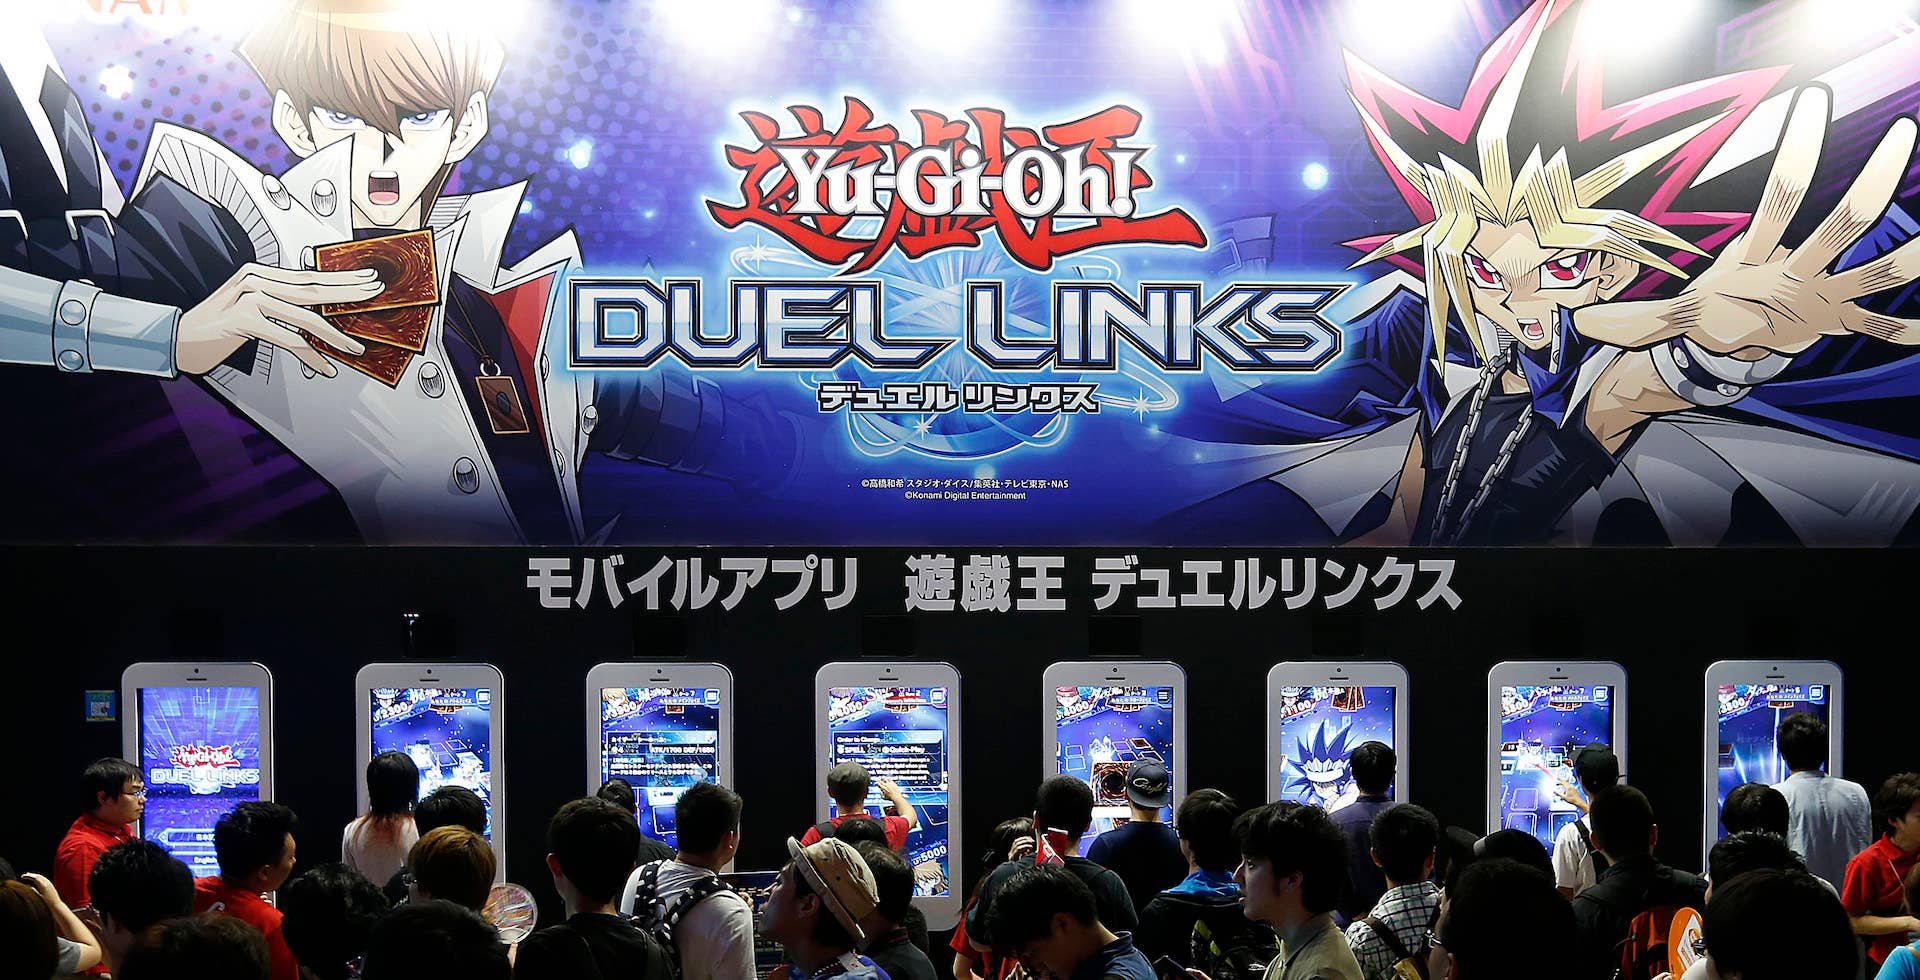 'Yu-Gi-Oh!' booth at Tokyo Game Show 2016